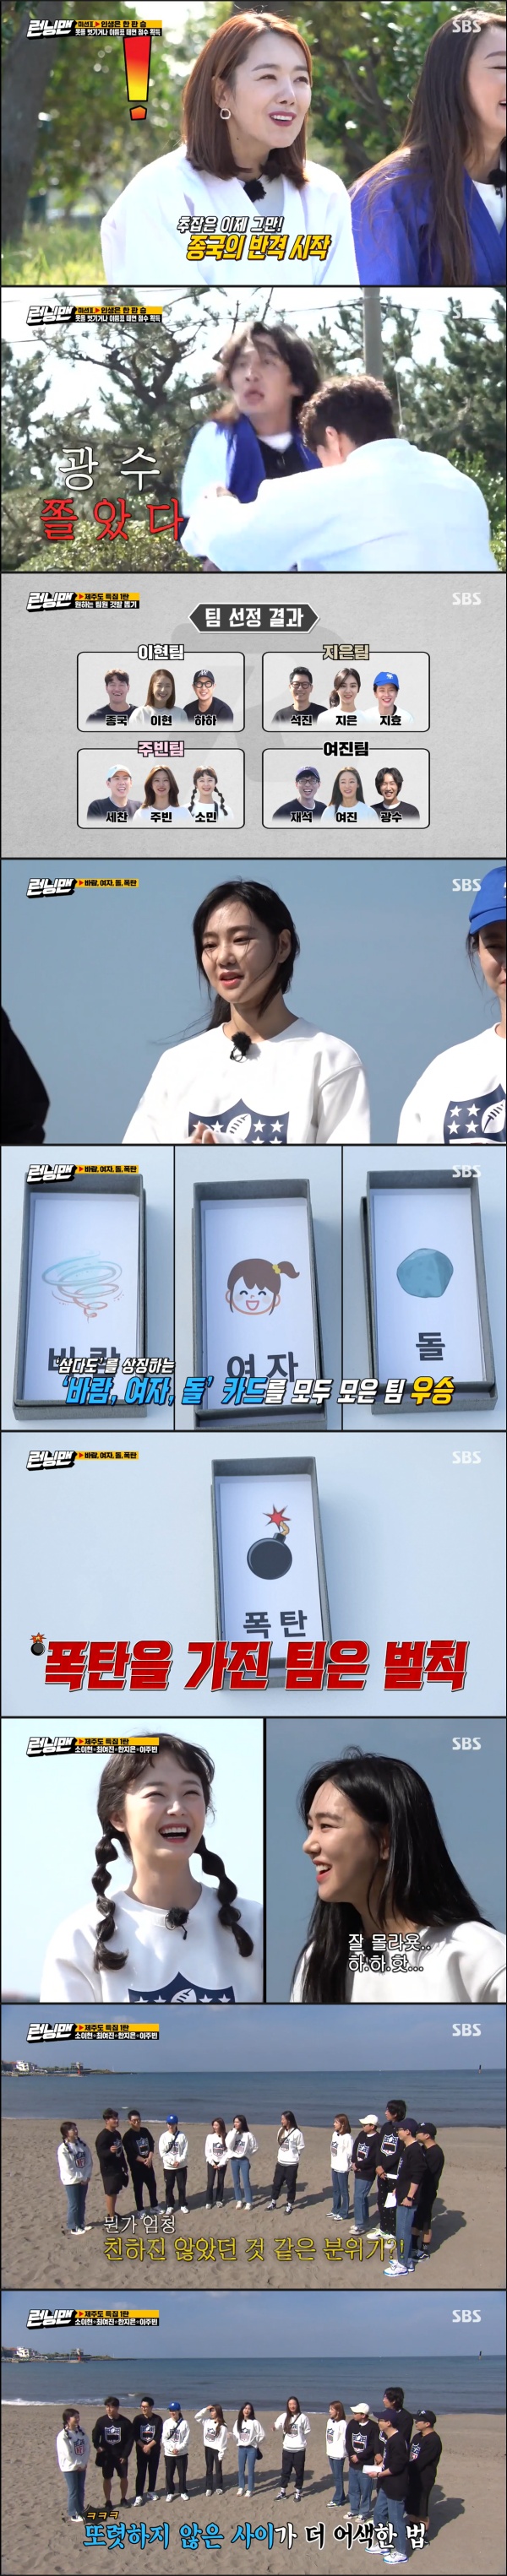 Han Ji-eun showed off Jeon So-min and tit-for-tat chemiHan Ji-eun Soi Hyun Choi Yeo-jin Lee Joo-bin appeared as a guest on SBS Running Man broadcast on the 1st.Yoo Jae-Suk asked Han Ji-eun about the past of Jeon So-min, as Han Ji-eun and Jeon So-min are from the same university.Asked, Han Ji-eun said, I remember (Jeon So-min) being the meeting The Dream Team.Jeon So-min said: There was also a builder on The Dream Team.I once said, When I was in school, I had a hard time meeting and after that, I got another person. Thats Han Ji-eun Haha, who listened to the two peoples stories, told Jeon So-min, You were the position of Yoo Jae-Suk.Han Ji-eun said, Every time we meet, my seniors have designated someone to go out, and Somin and I have often gone out. I am sorry if there was something sad in the meeting.But he said, But I did not do it on purpose. What do you think? They say so. I told you to pick me on purpose.The relationship between me and Somin seems to be a unilateral consciousness of damage to Somin, he said. I remember that Somin is involved with a very close friend.Im in a position thats in the middle, he explained.Jeon So-min and Yoo Jae-Suk, who reached the Jenga final, both started the game with the fate of each team.The low frequency and game were played, which made me nervous. Even on my turn to keep coming back, Jeon So-min showed his ultimate lengthening ability.Lee Kwang-soo pulled out the medical device wire and put it in his toothbrush. Yoo Jae-Suk laughed even though the power was turned off.Yang Se-chans snowball turned on the power again and the game went on, and eventually Lee Joo-bins team won the sea urchin with the victory of Jeon So-min.Han Ji-eun told the Running Man members who asked about his past with Jeon So-min, Im sorry if there was a sad meeting at the meeting.They like me, he said.I think the minor is a sense of unilateral damage to me, Han Ji-eun said, and Im so bad.I should not go back like this. He laughed again.The members who were moving to the car talked about the resemblance of each other; the members laughed at Yoo Jae-Suk, saying, It seems like anchovy.Yang Se-chan explained, The aftershock resembles a little flatfish, and Choi Yeo-jin, who heard it, said, If you are going to say this, do something beautiful.Yoo Jae-Suk described the somin resembles a mating kissingurami and Jeon So-min responded, Im just a doctor fish, Im going to eat everything.Choi Yeo-jin said Lee Ju-bin looks like a nimo and Yang Se-chan praised it for nimo fitting in.Jeon So-min advised Yang Se-chan, who is shy, Do not say Nimo is good together alone, but do such a big thing.On the other hand, SBS Running Man is broadcast every Sunday at 5 pm.